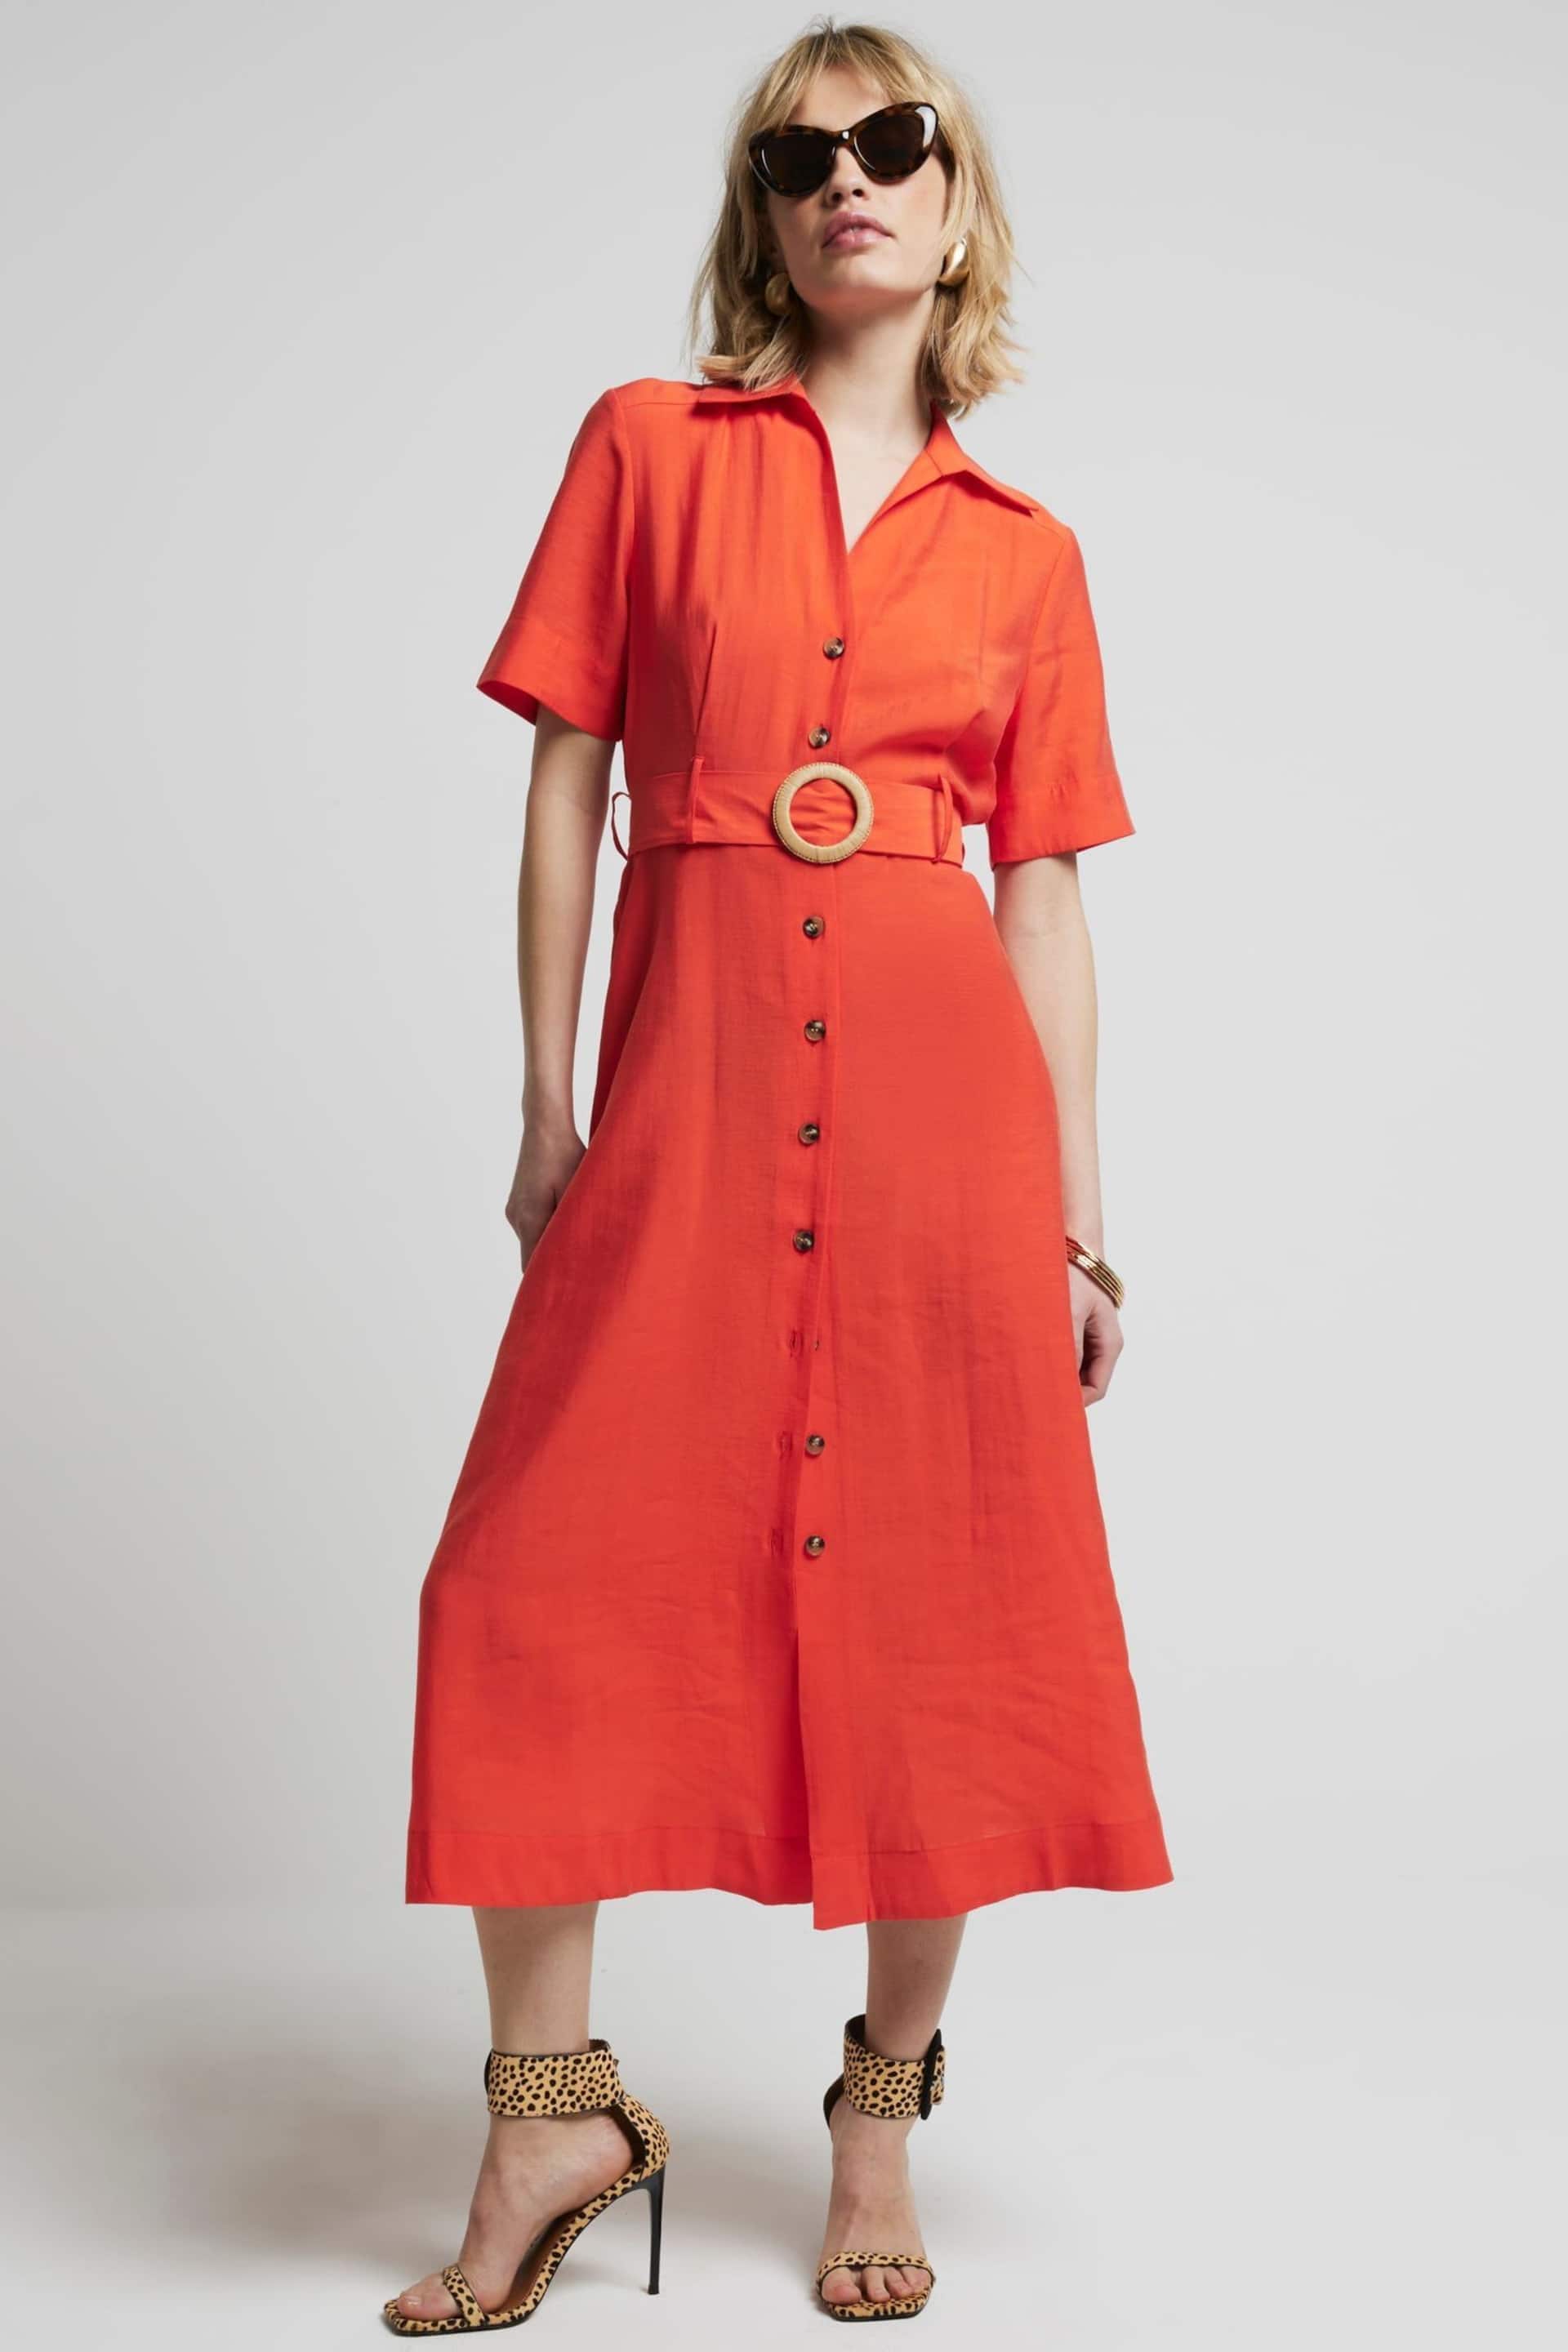 River Island Red Belted Shirt Dress - Image 1 of 4